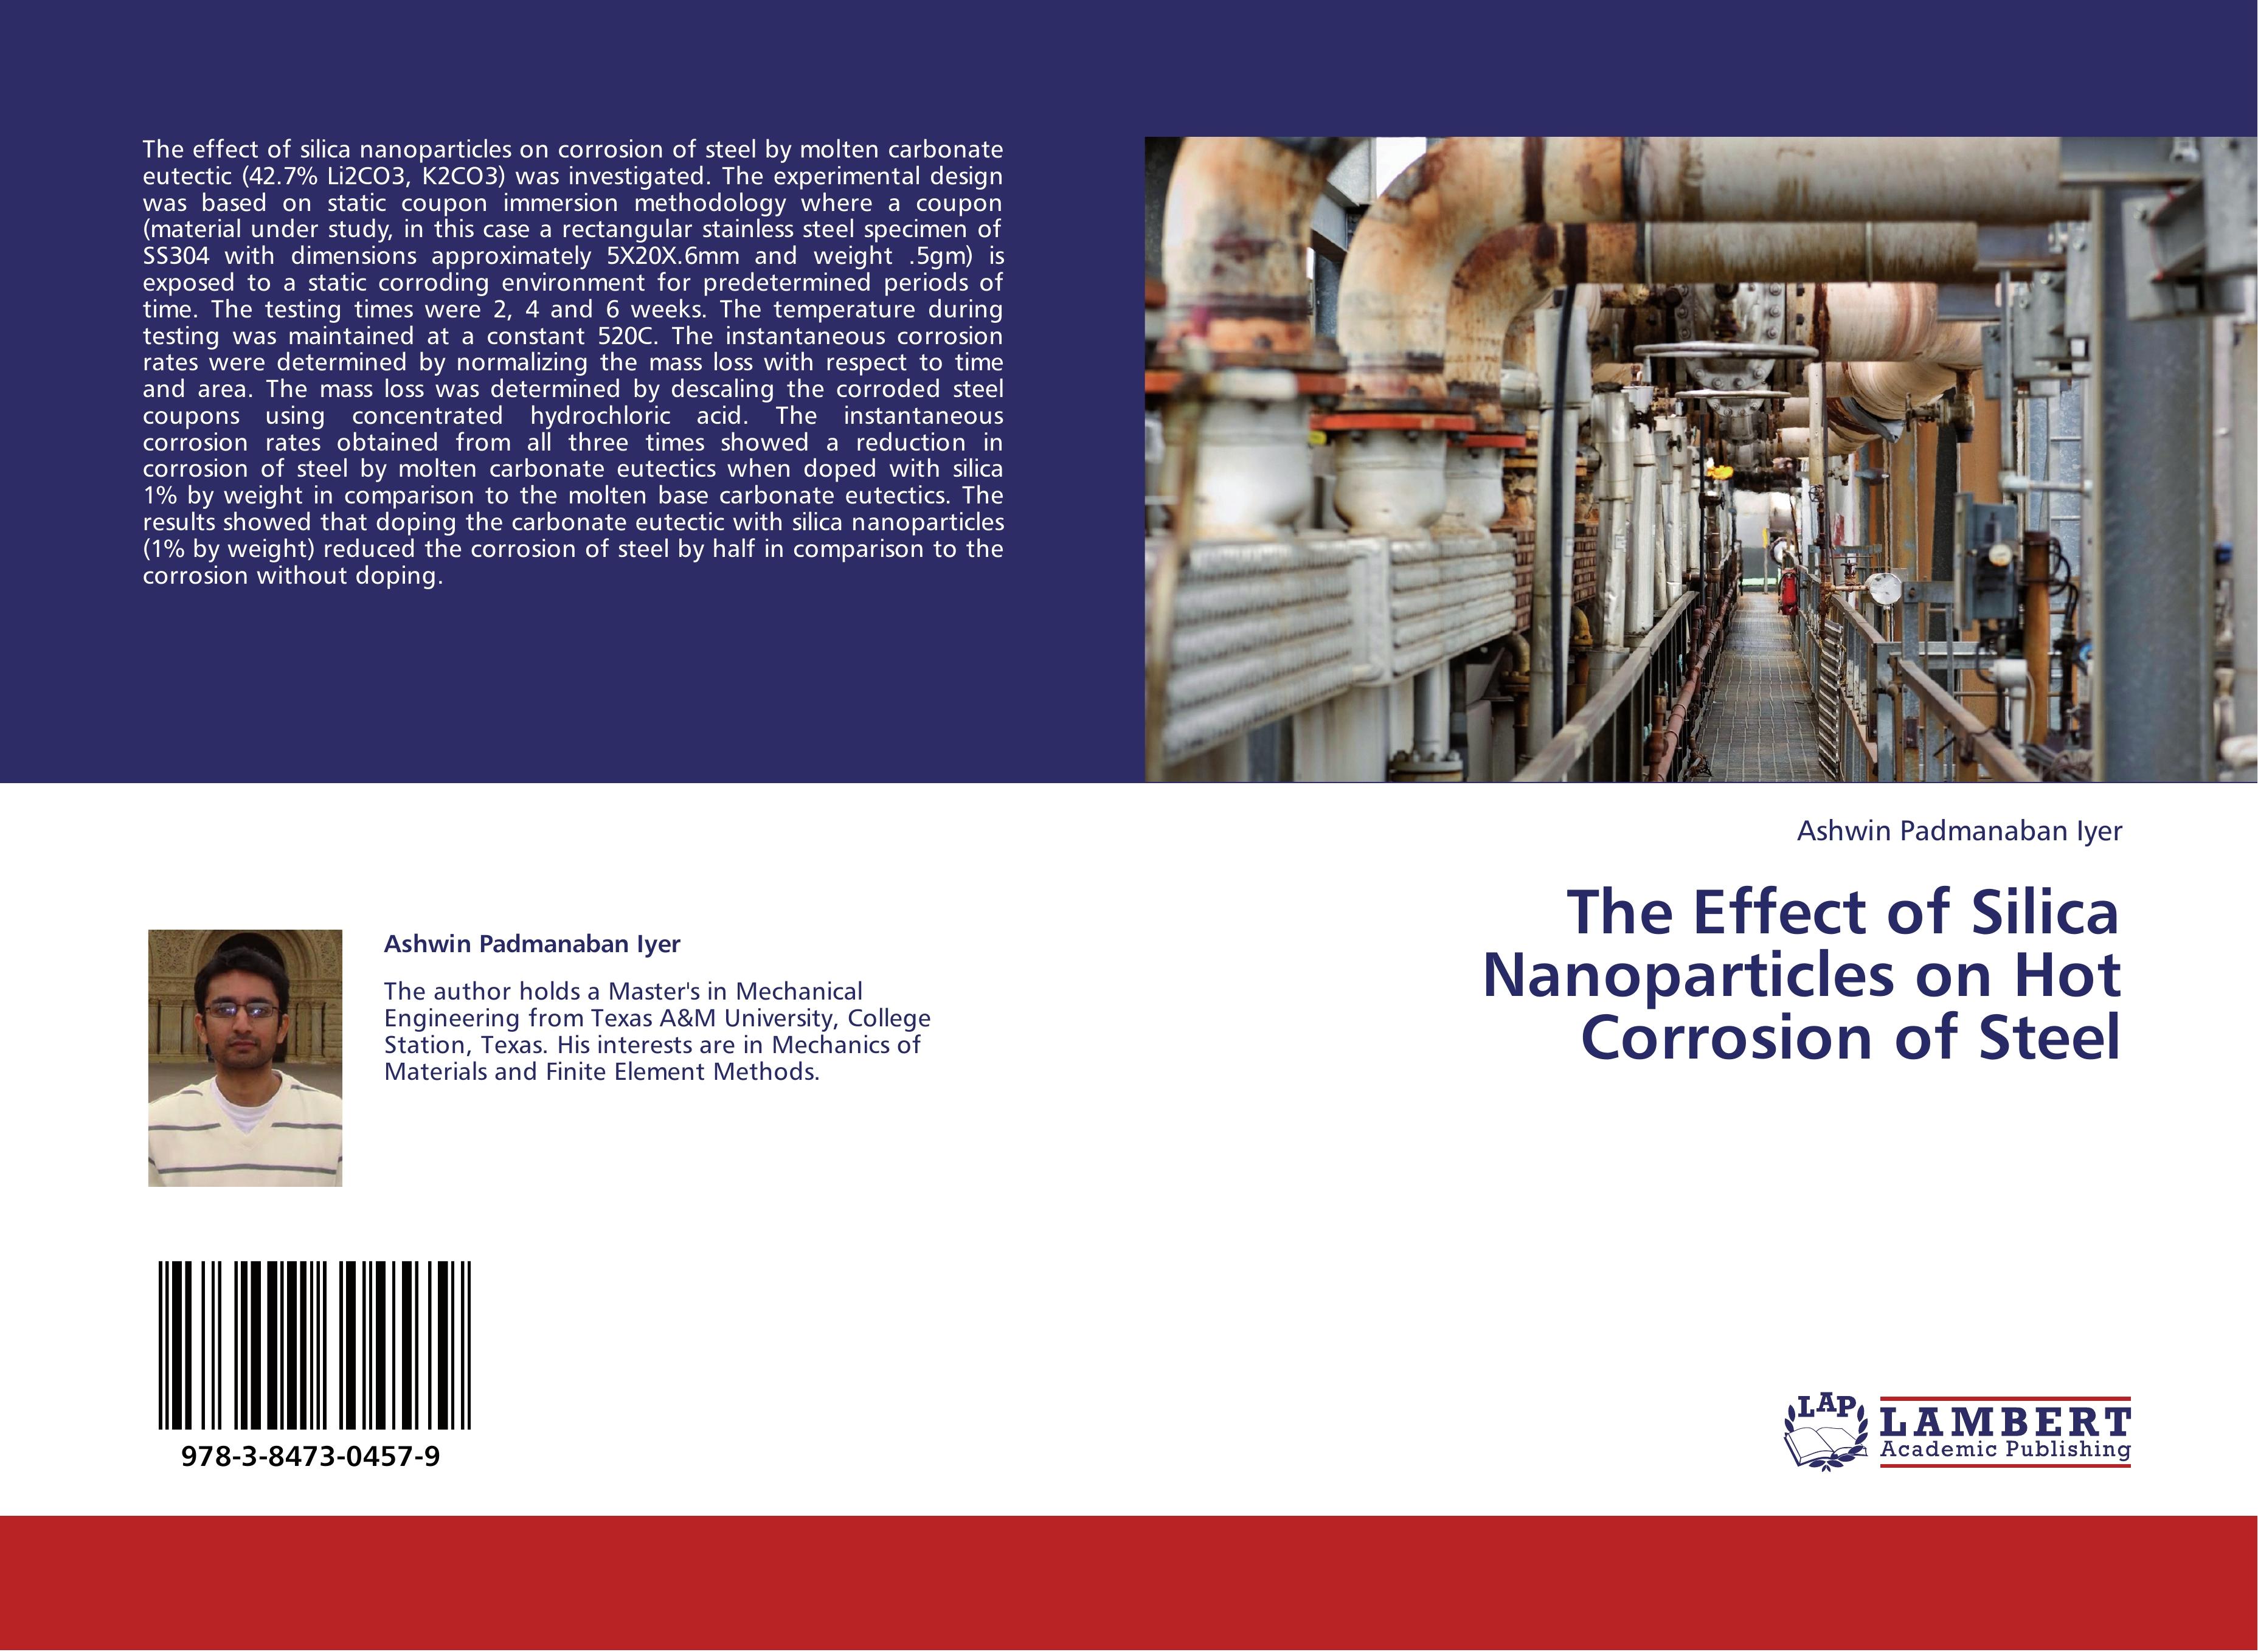 The Effect of Silica Nanoparticles on Hot Corrosion of Steel - Ashwin Padmanaban Iyer